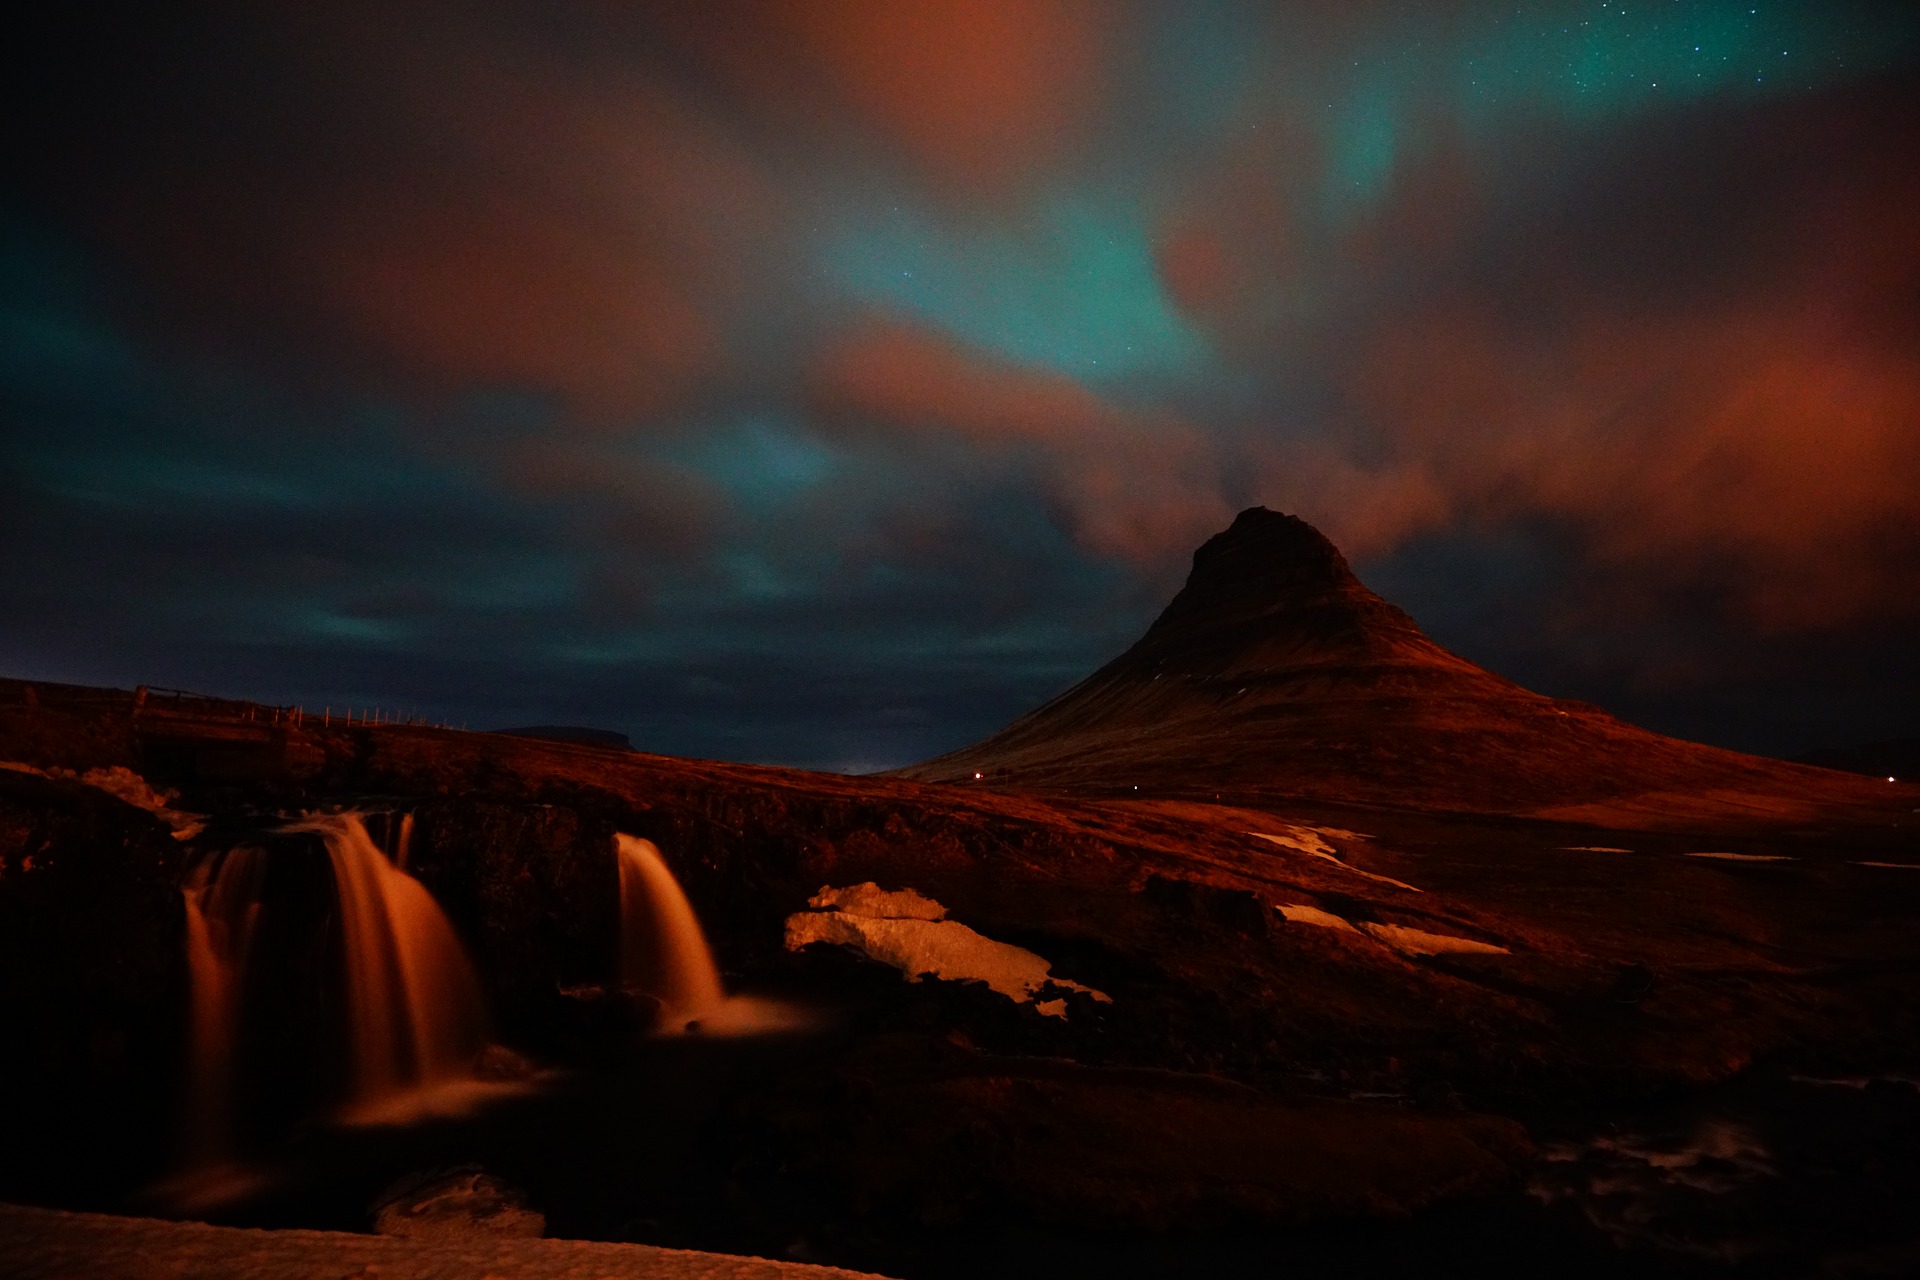 Kirjkjufell in iceland with blue northern lights